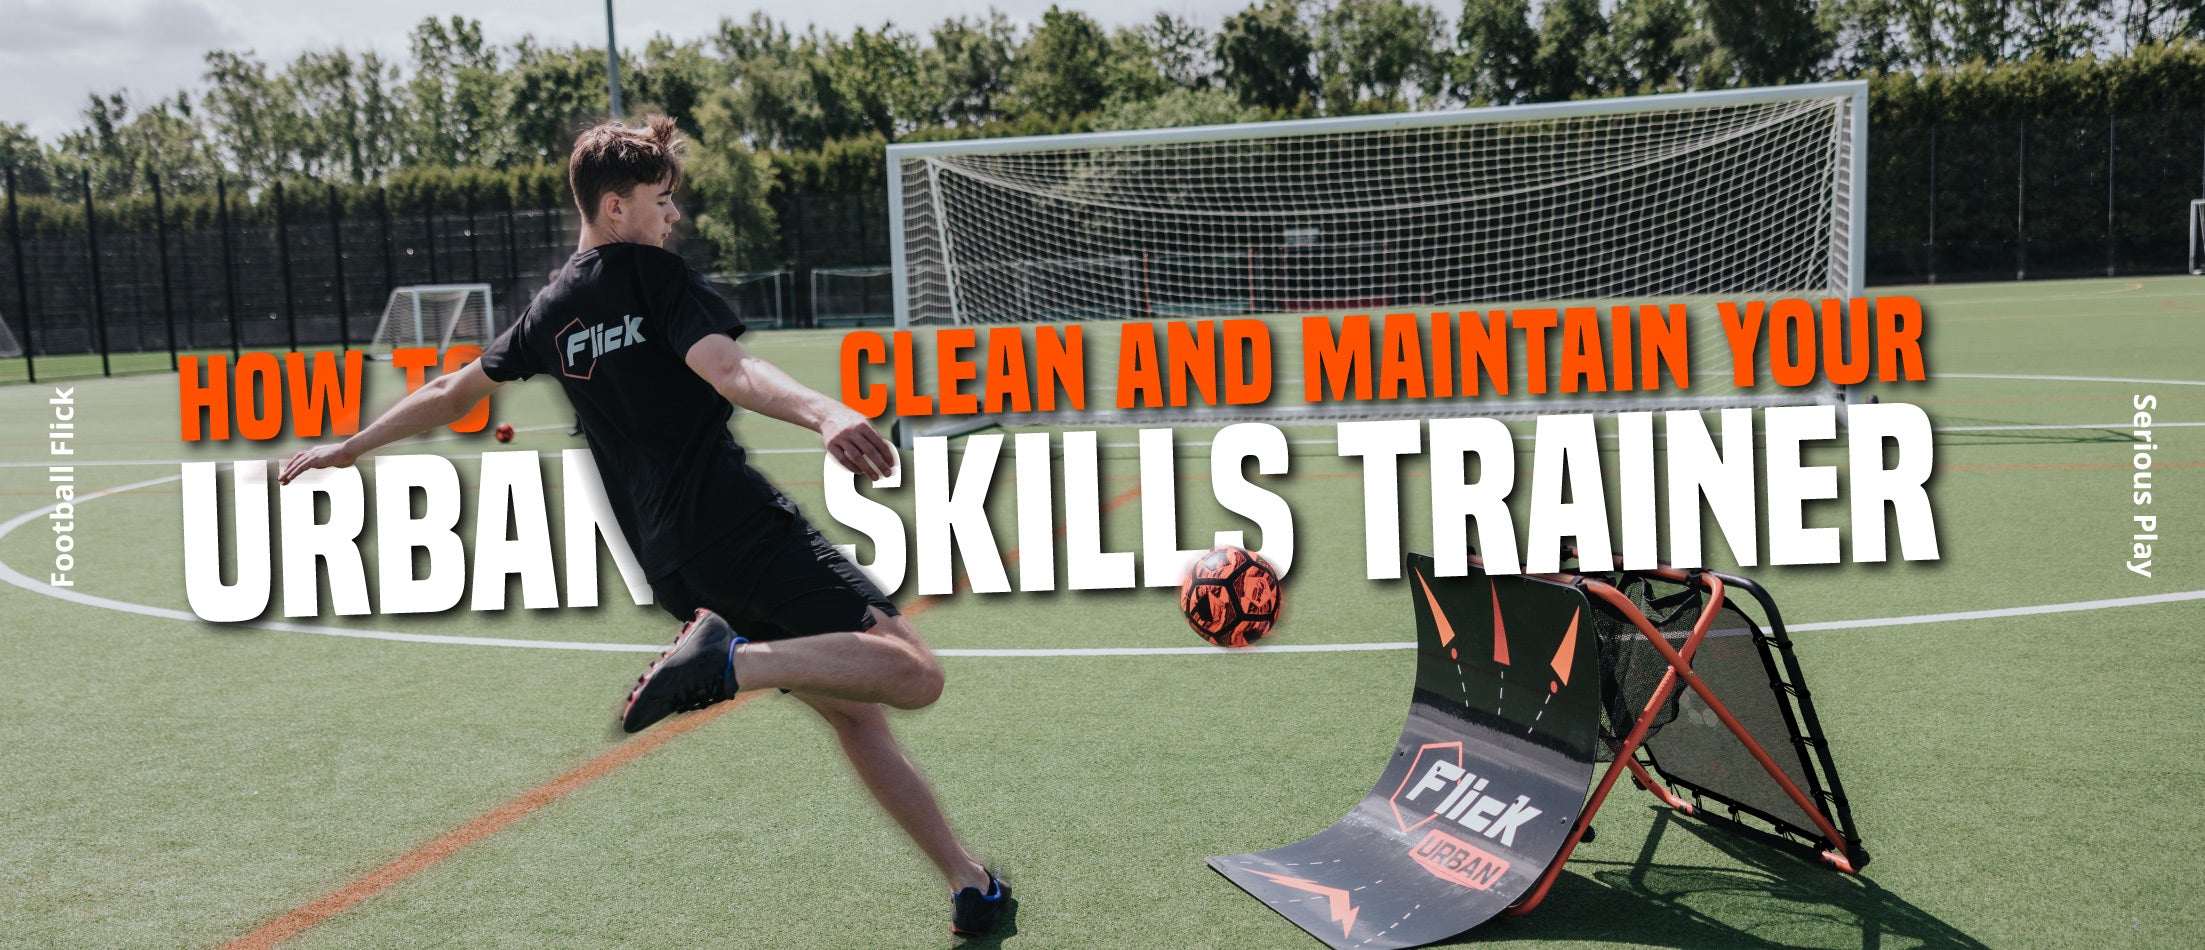 How to Properly Care for, Maintain, and Clean Your Urban Skills Trainer